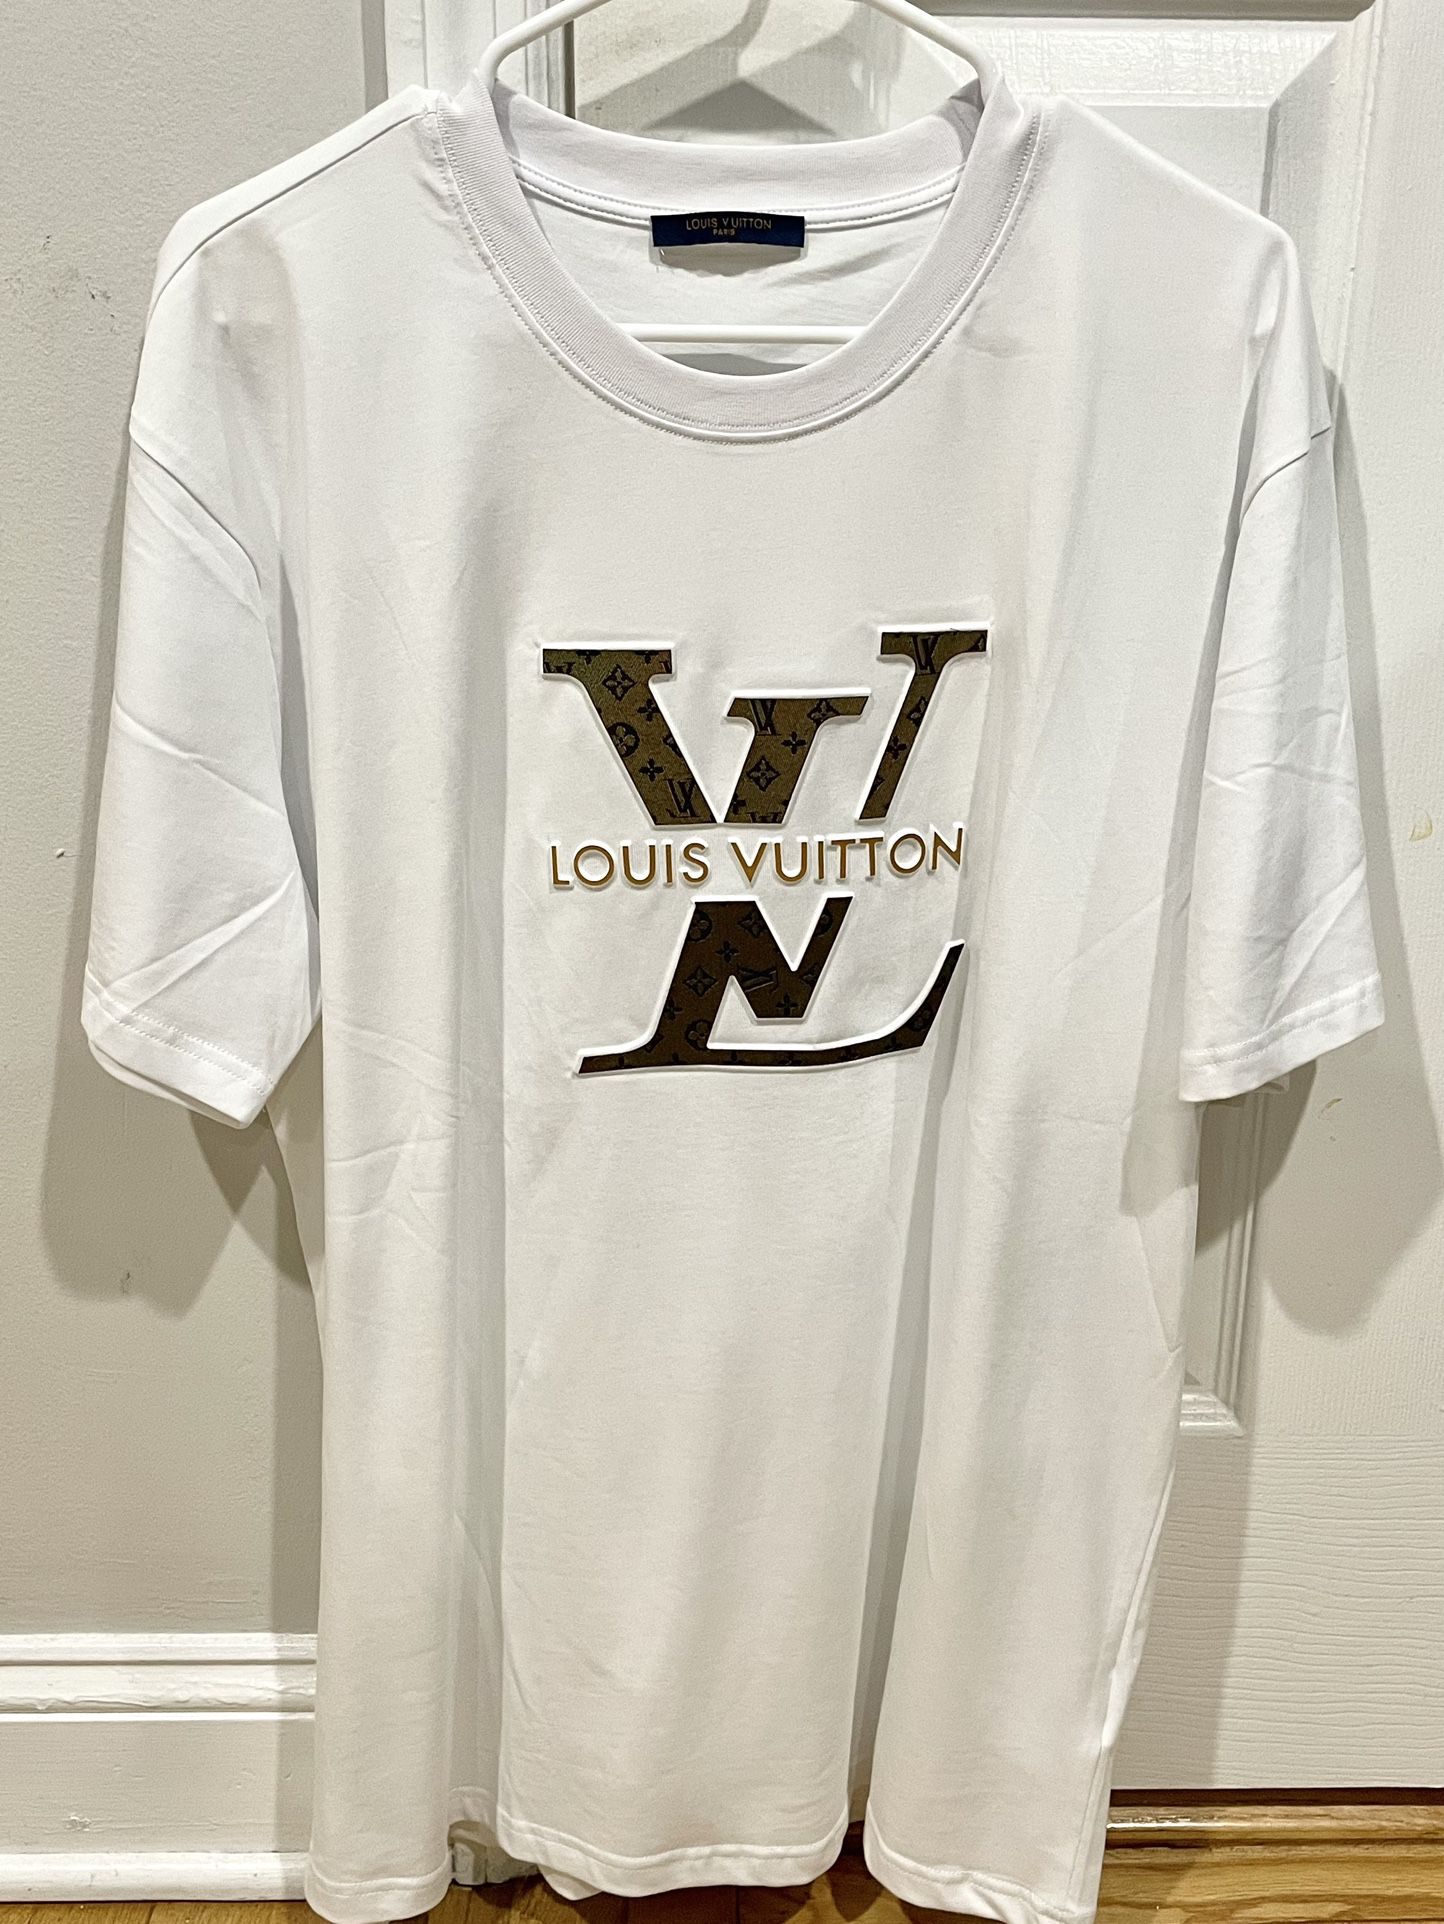 Men's Louis Vuitton T-Shirt Size XL for Sale in The Bronx, New York